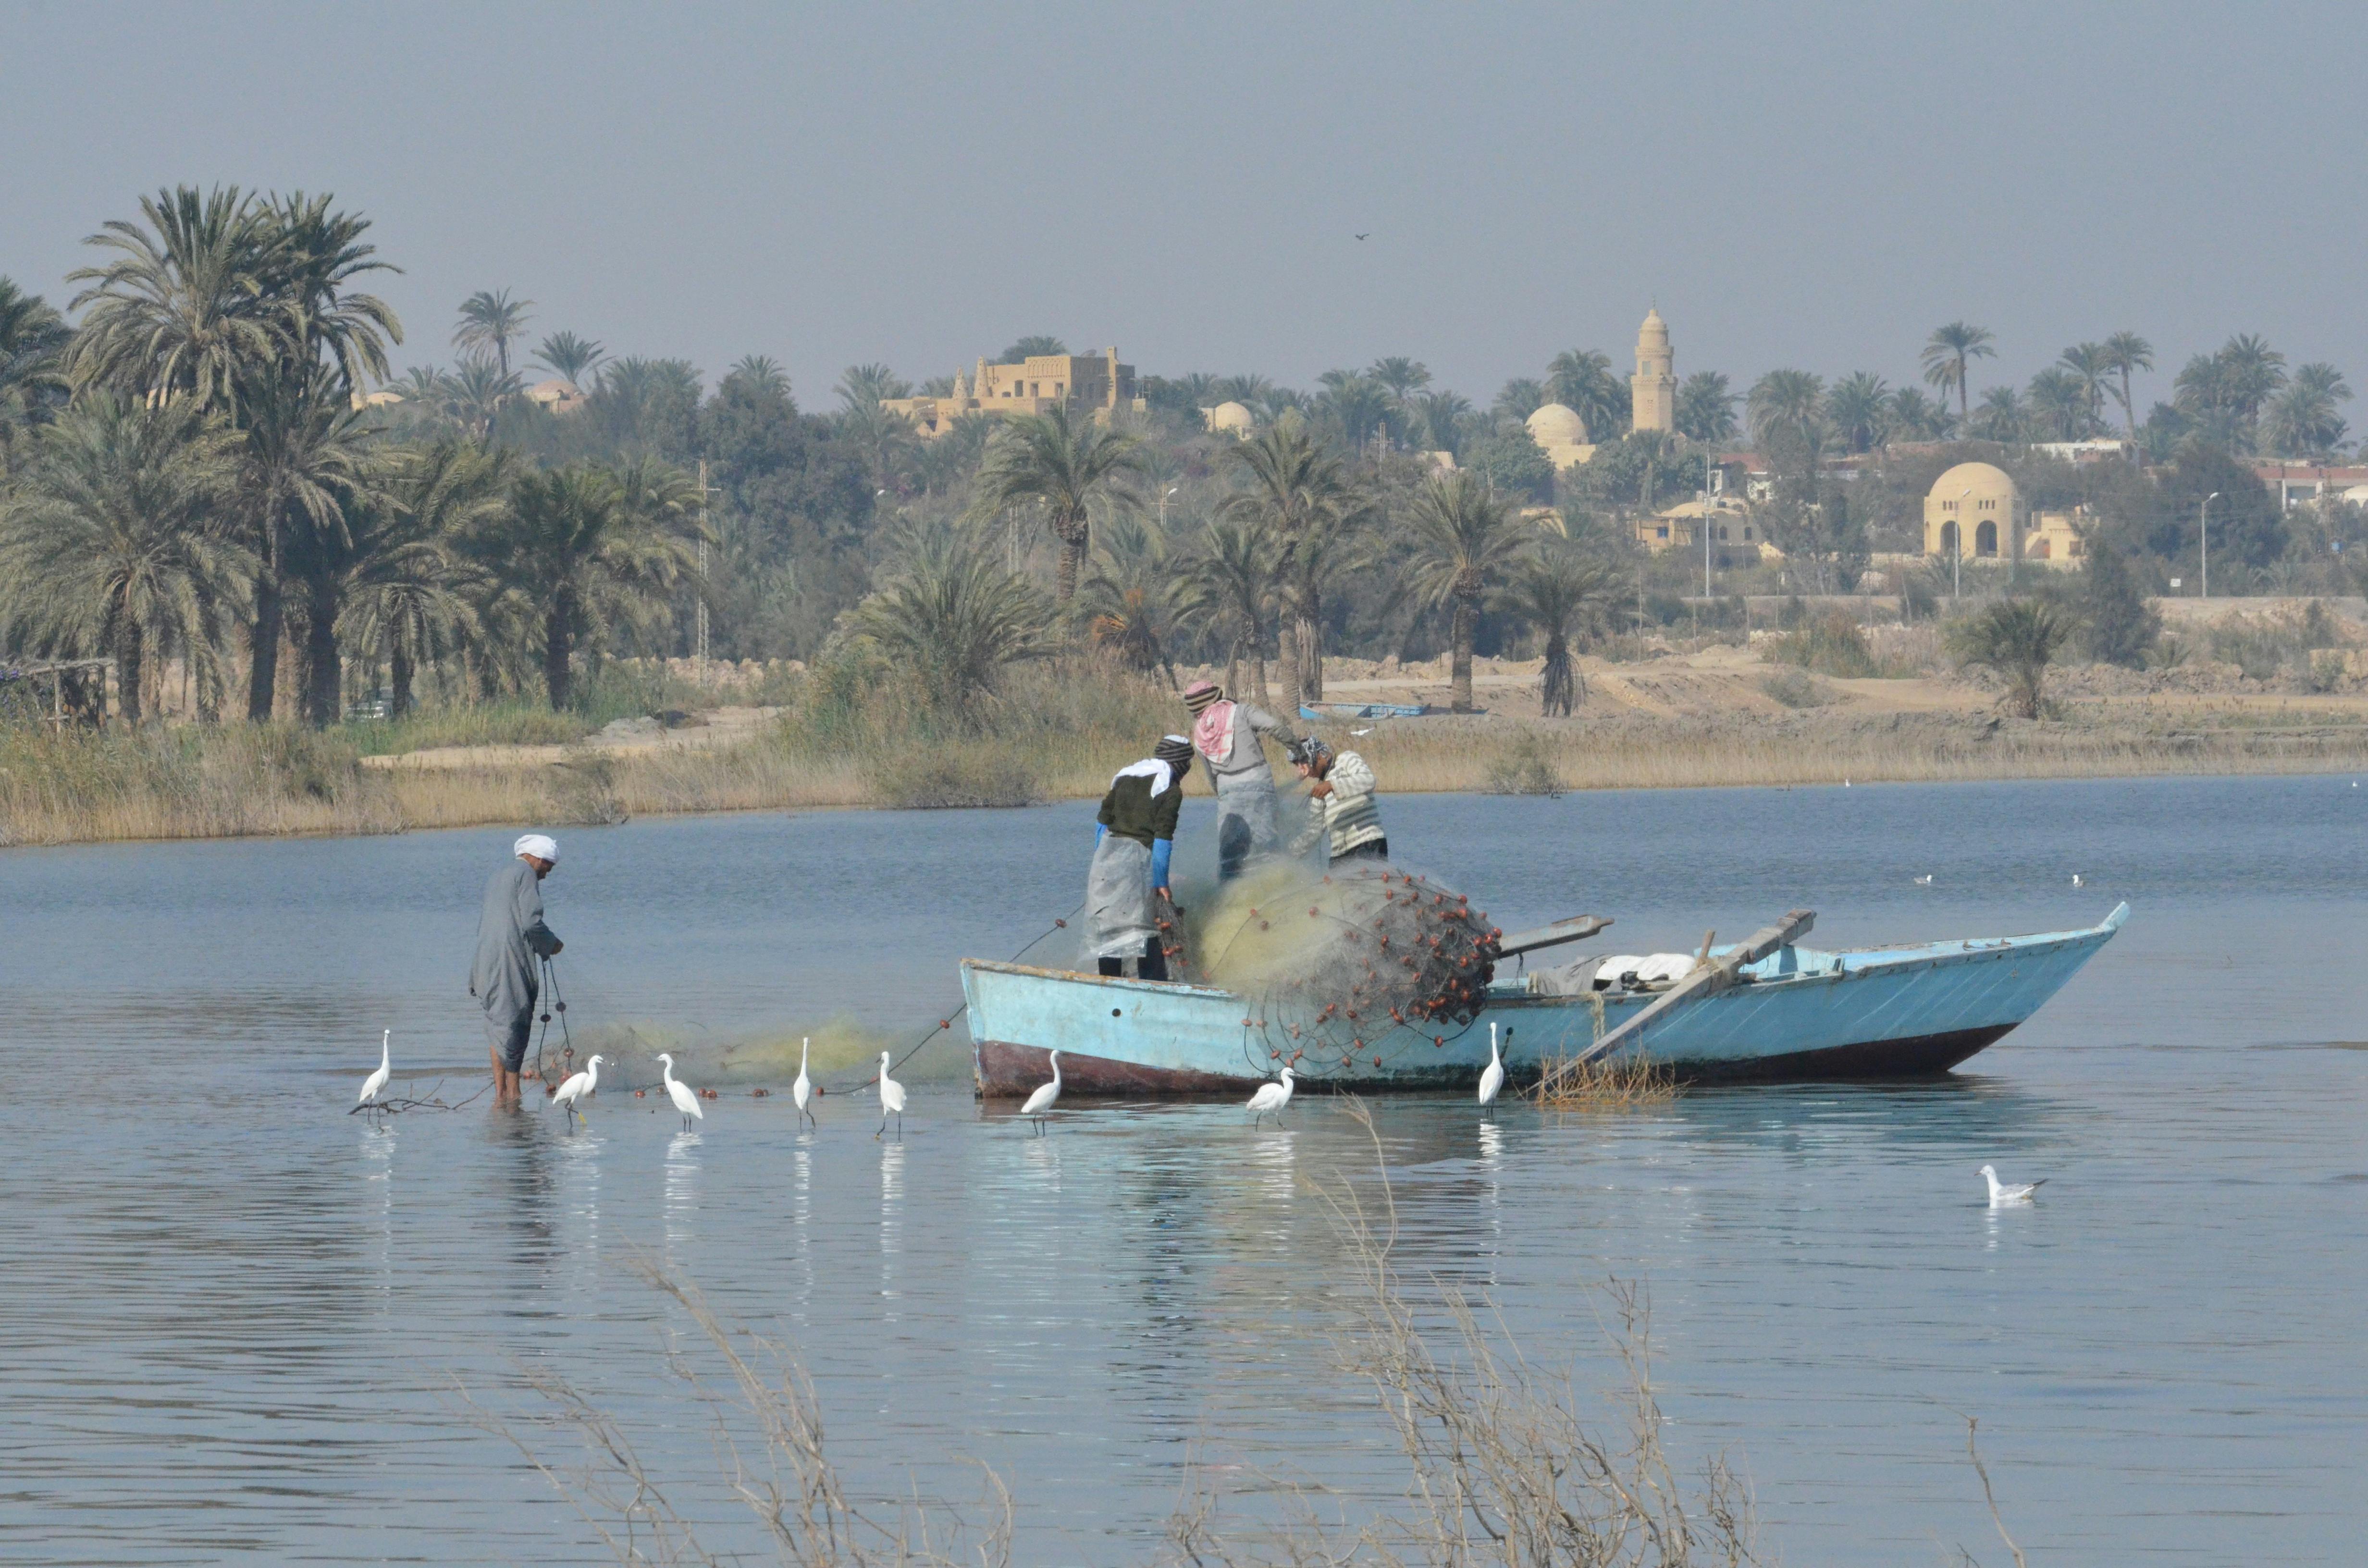 Full day tour to El Fayoum Oasis Musement